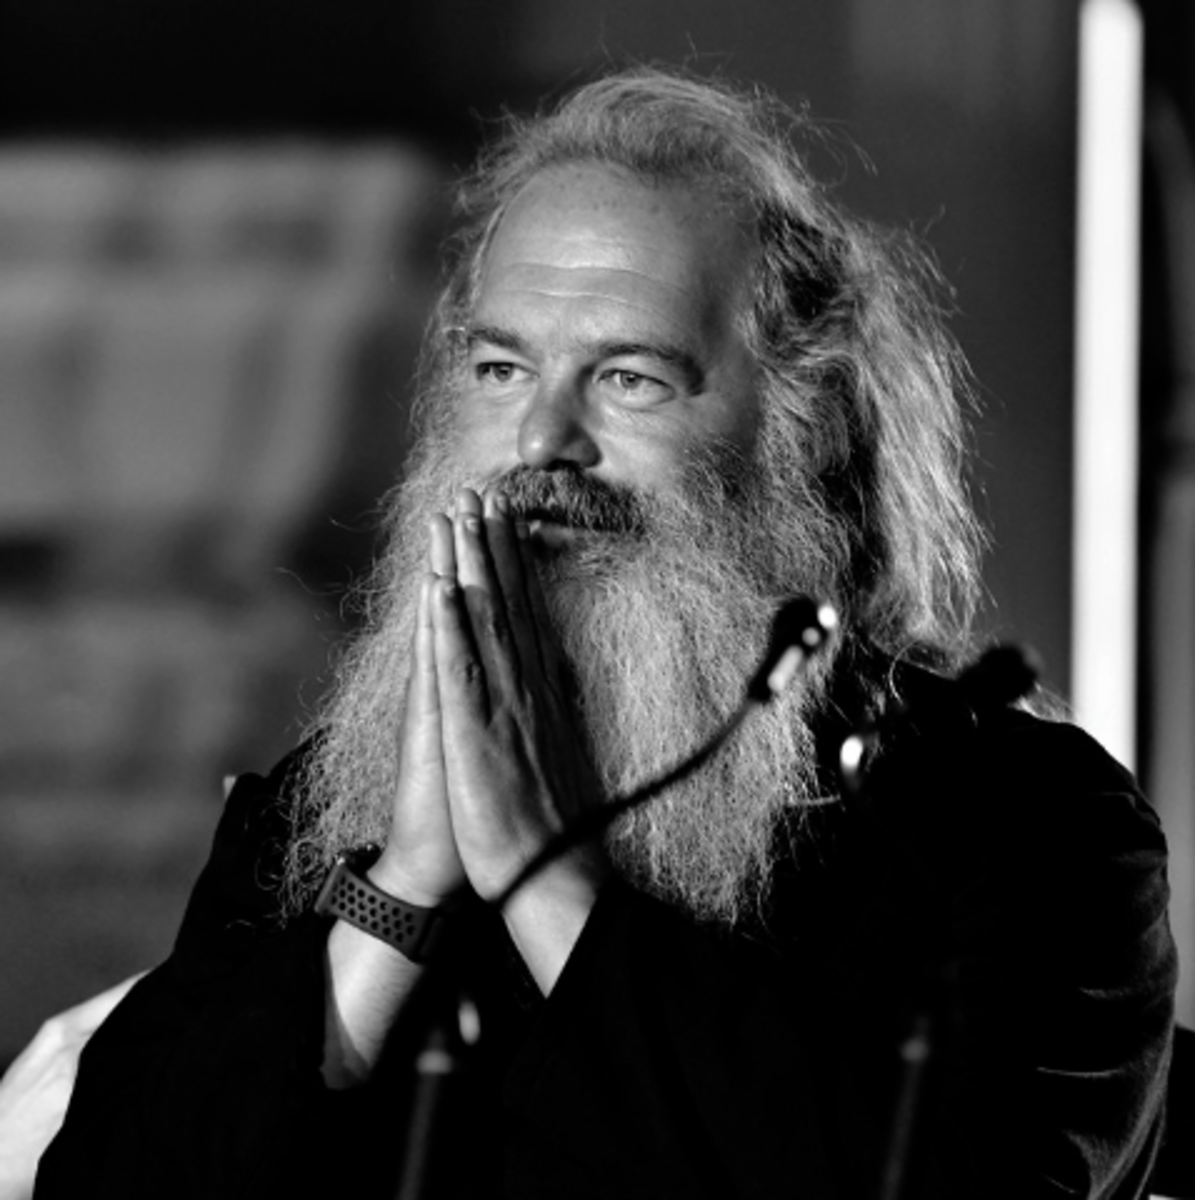 Rick Rubin: From Hip Hop to Rock and Beyond